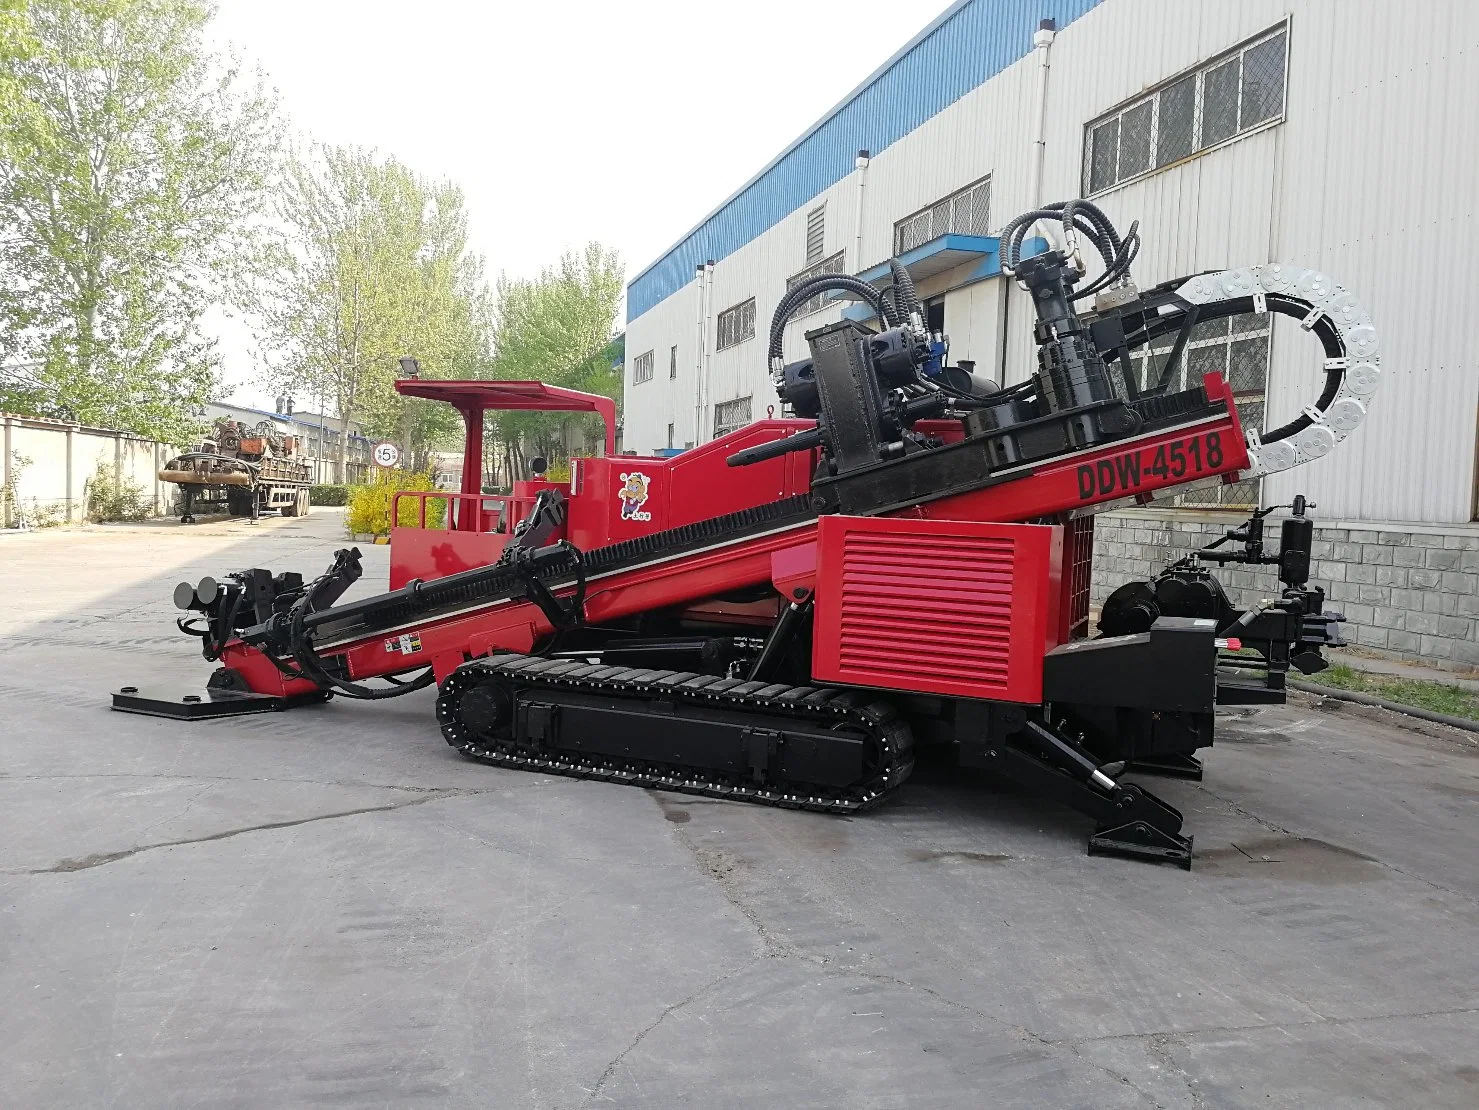 Trenchless Horizontal Directional Drilling Rig Ddw-5527